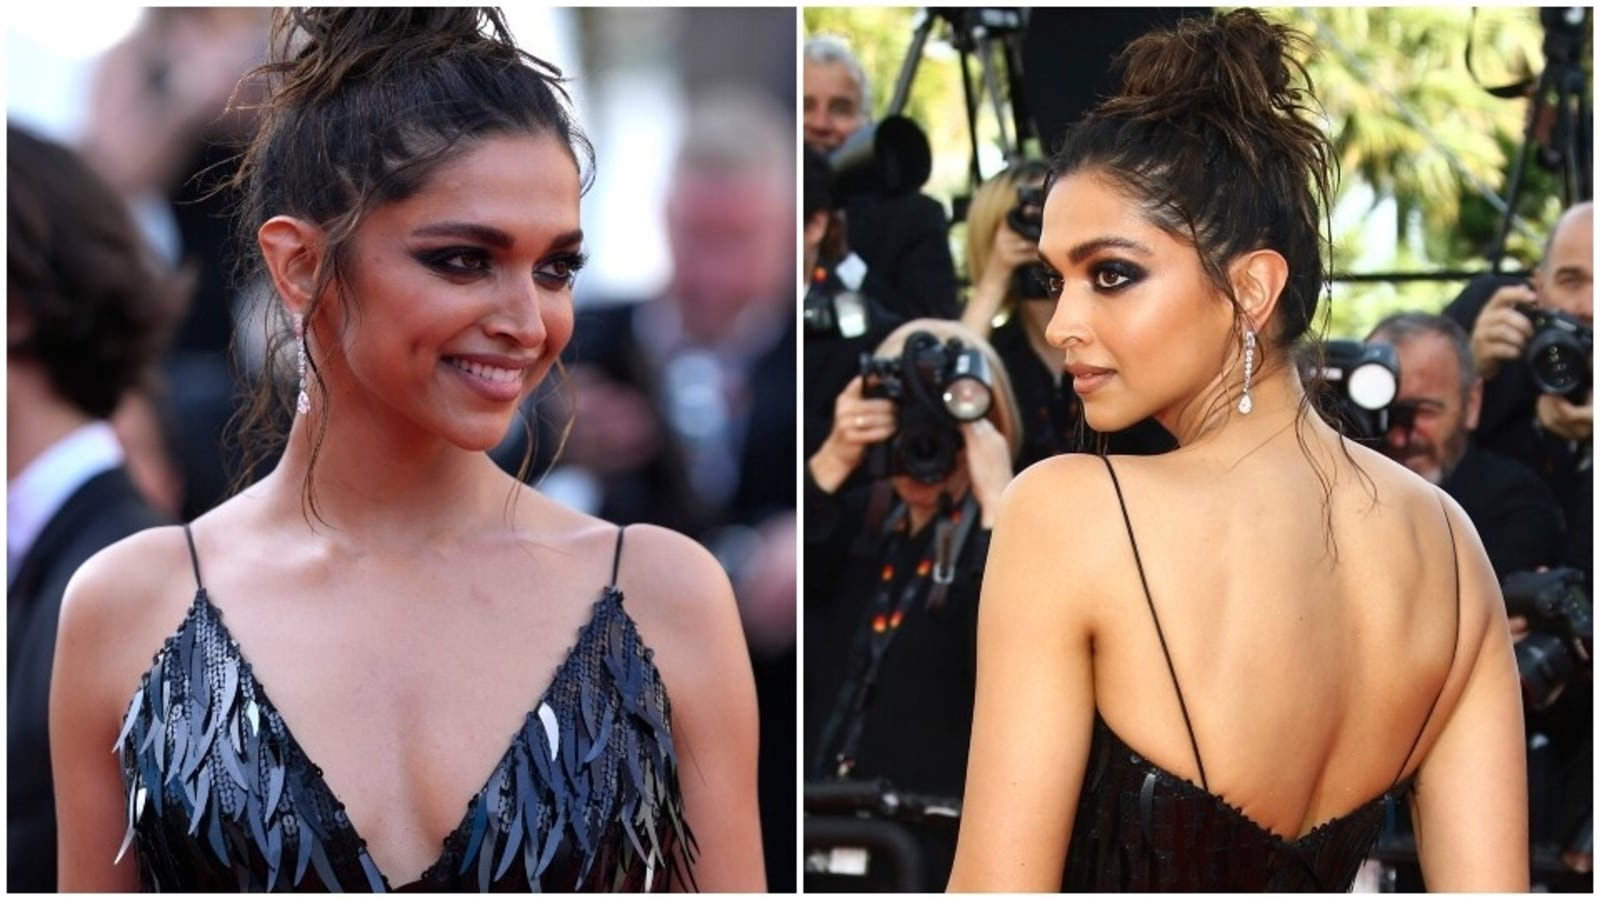 Deepika Padukone wore a custom red Louis Vuitton gown on the Cannes 2022  red carpet, Vogue India